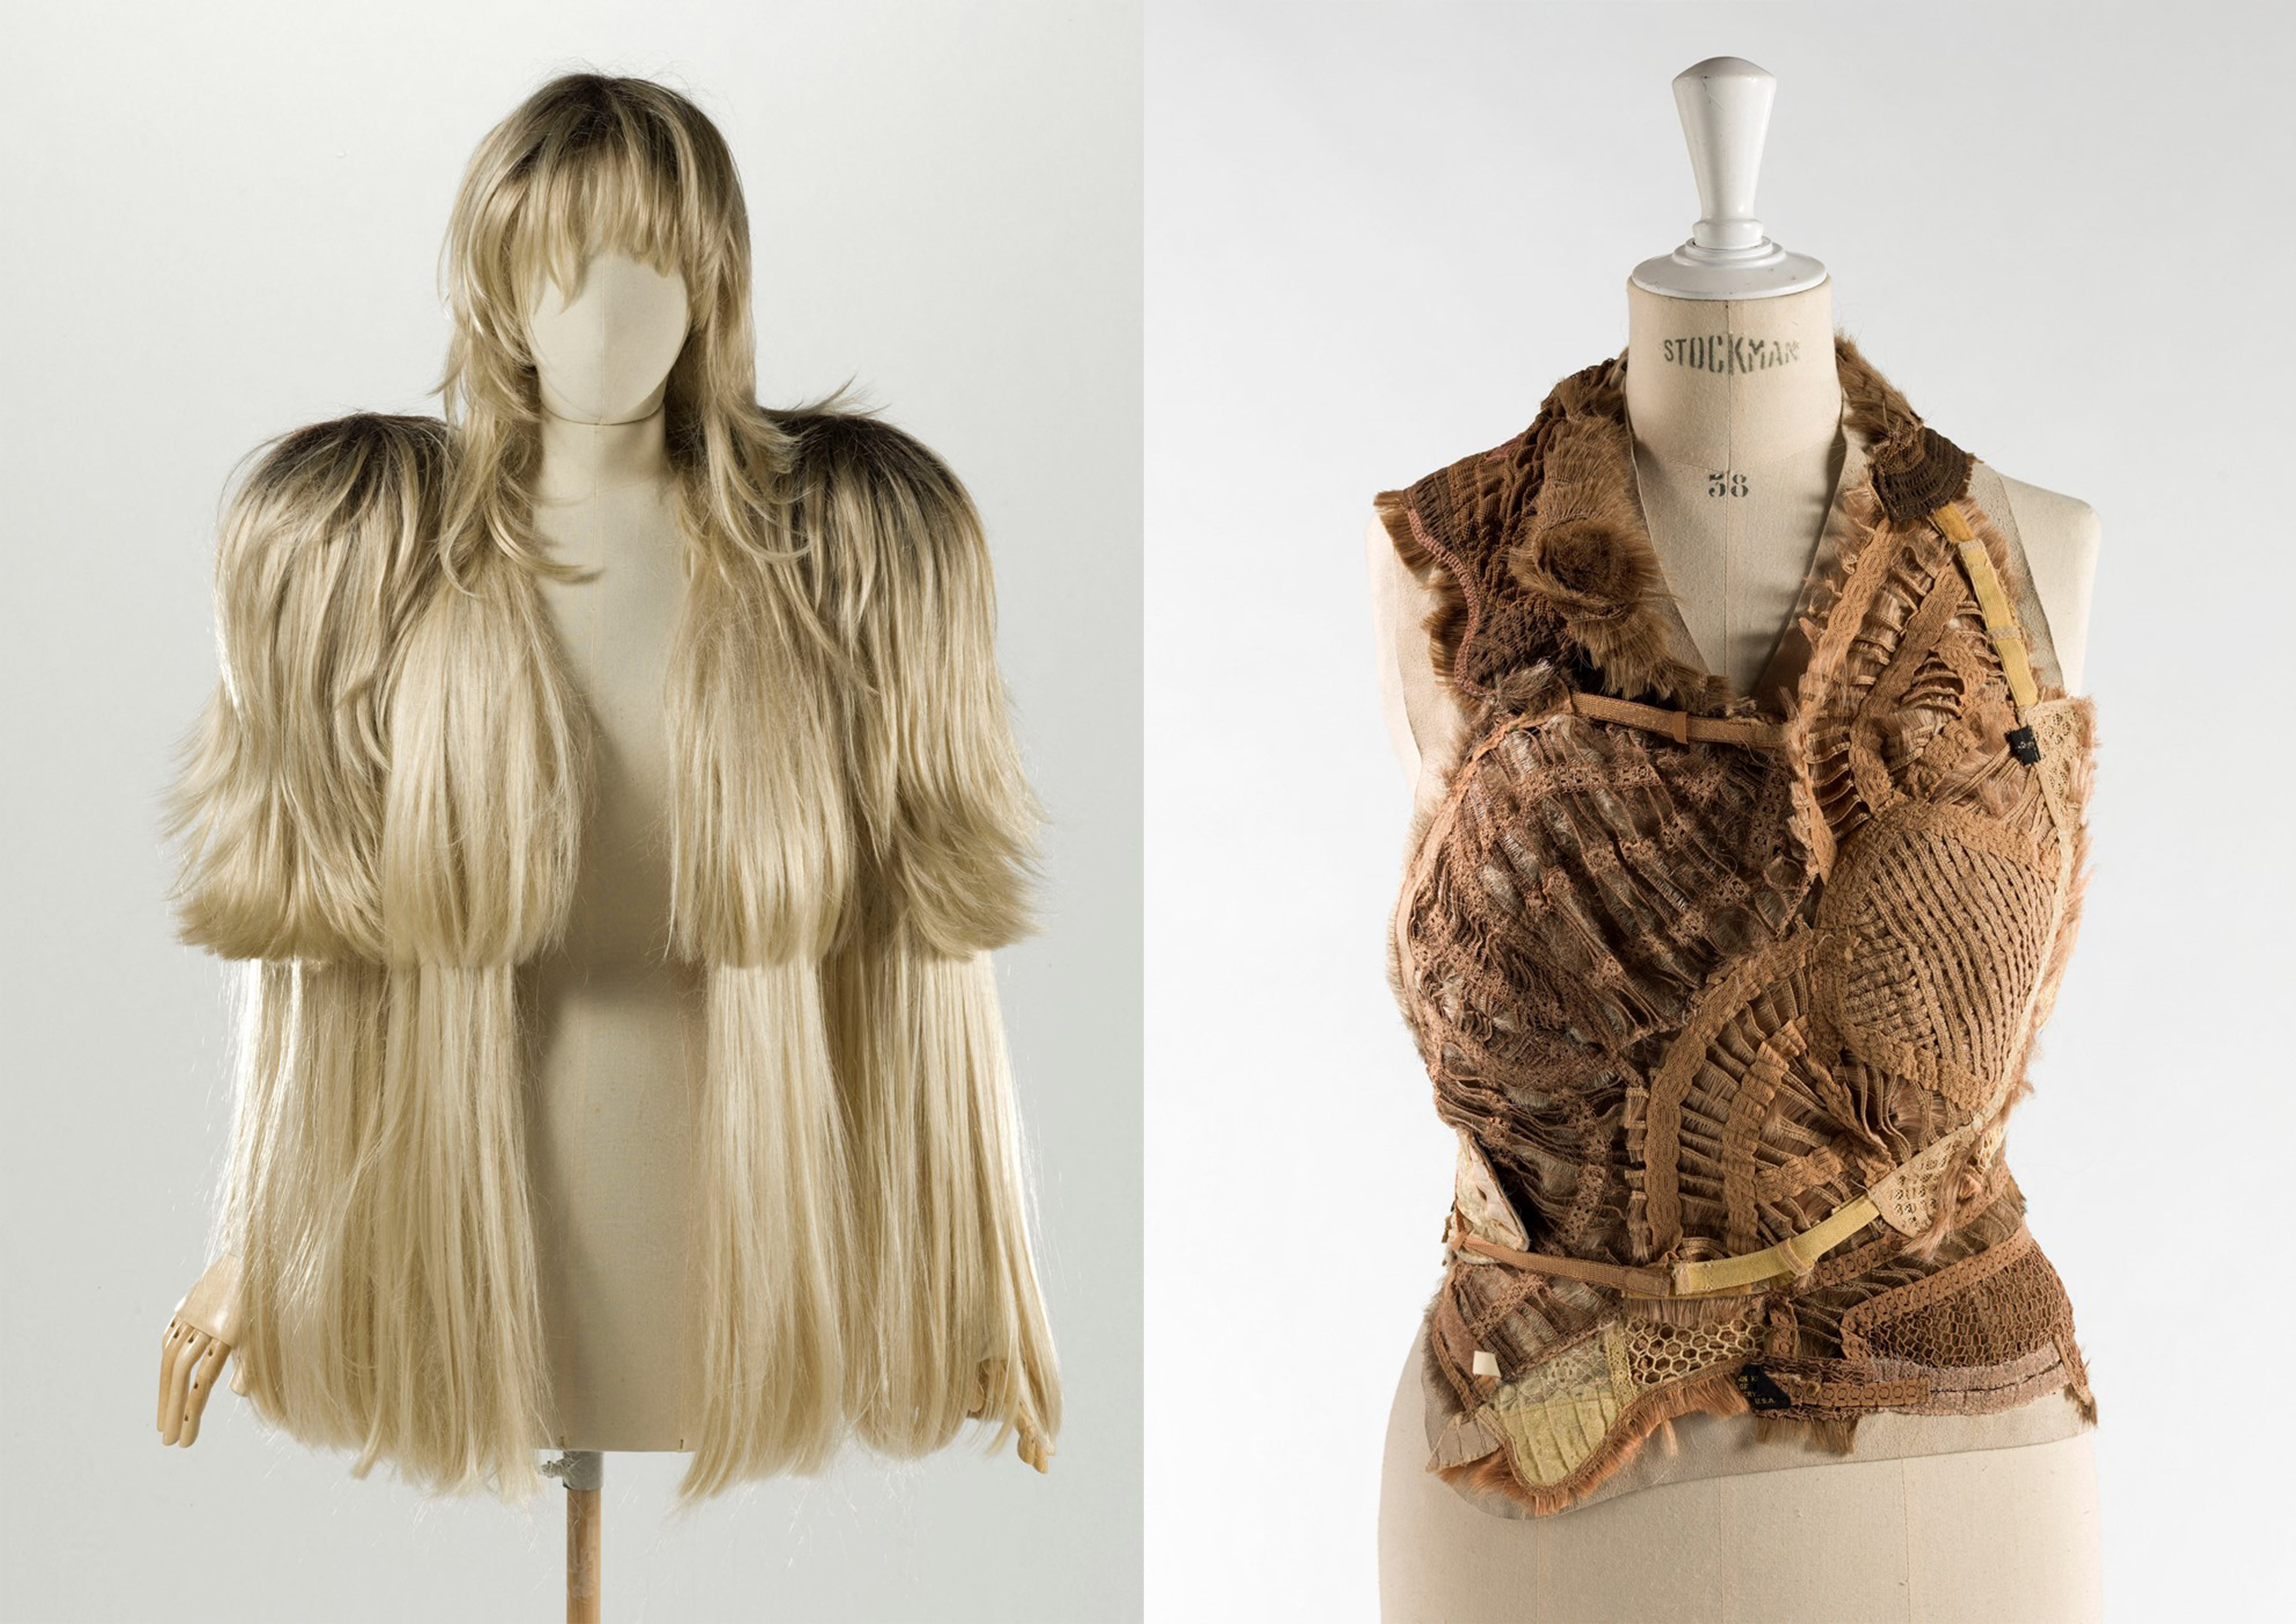 Martin Margiela: The Silent Designer with The Loudest Influence - DEW ...